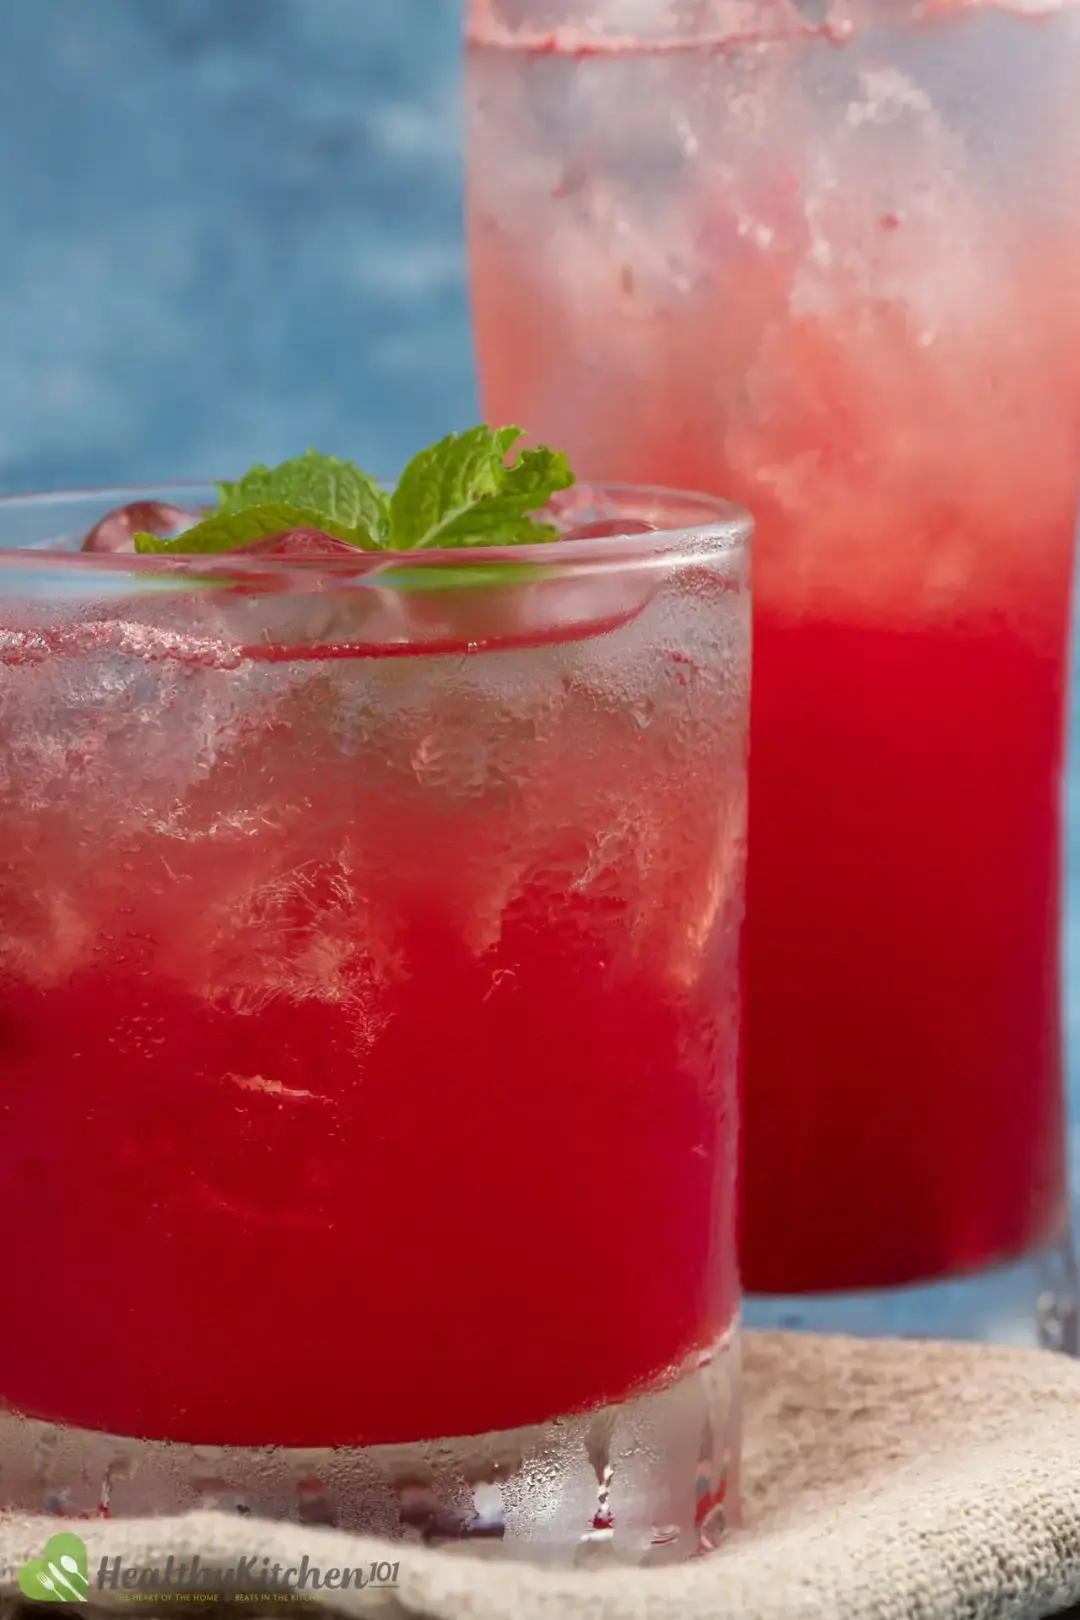 A close-up shot of two glasses of watermelon juice